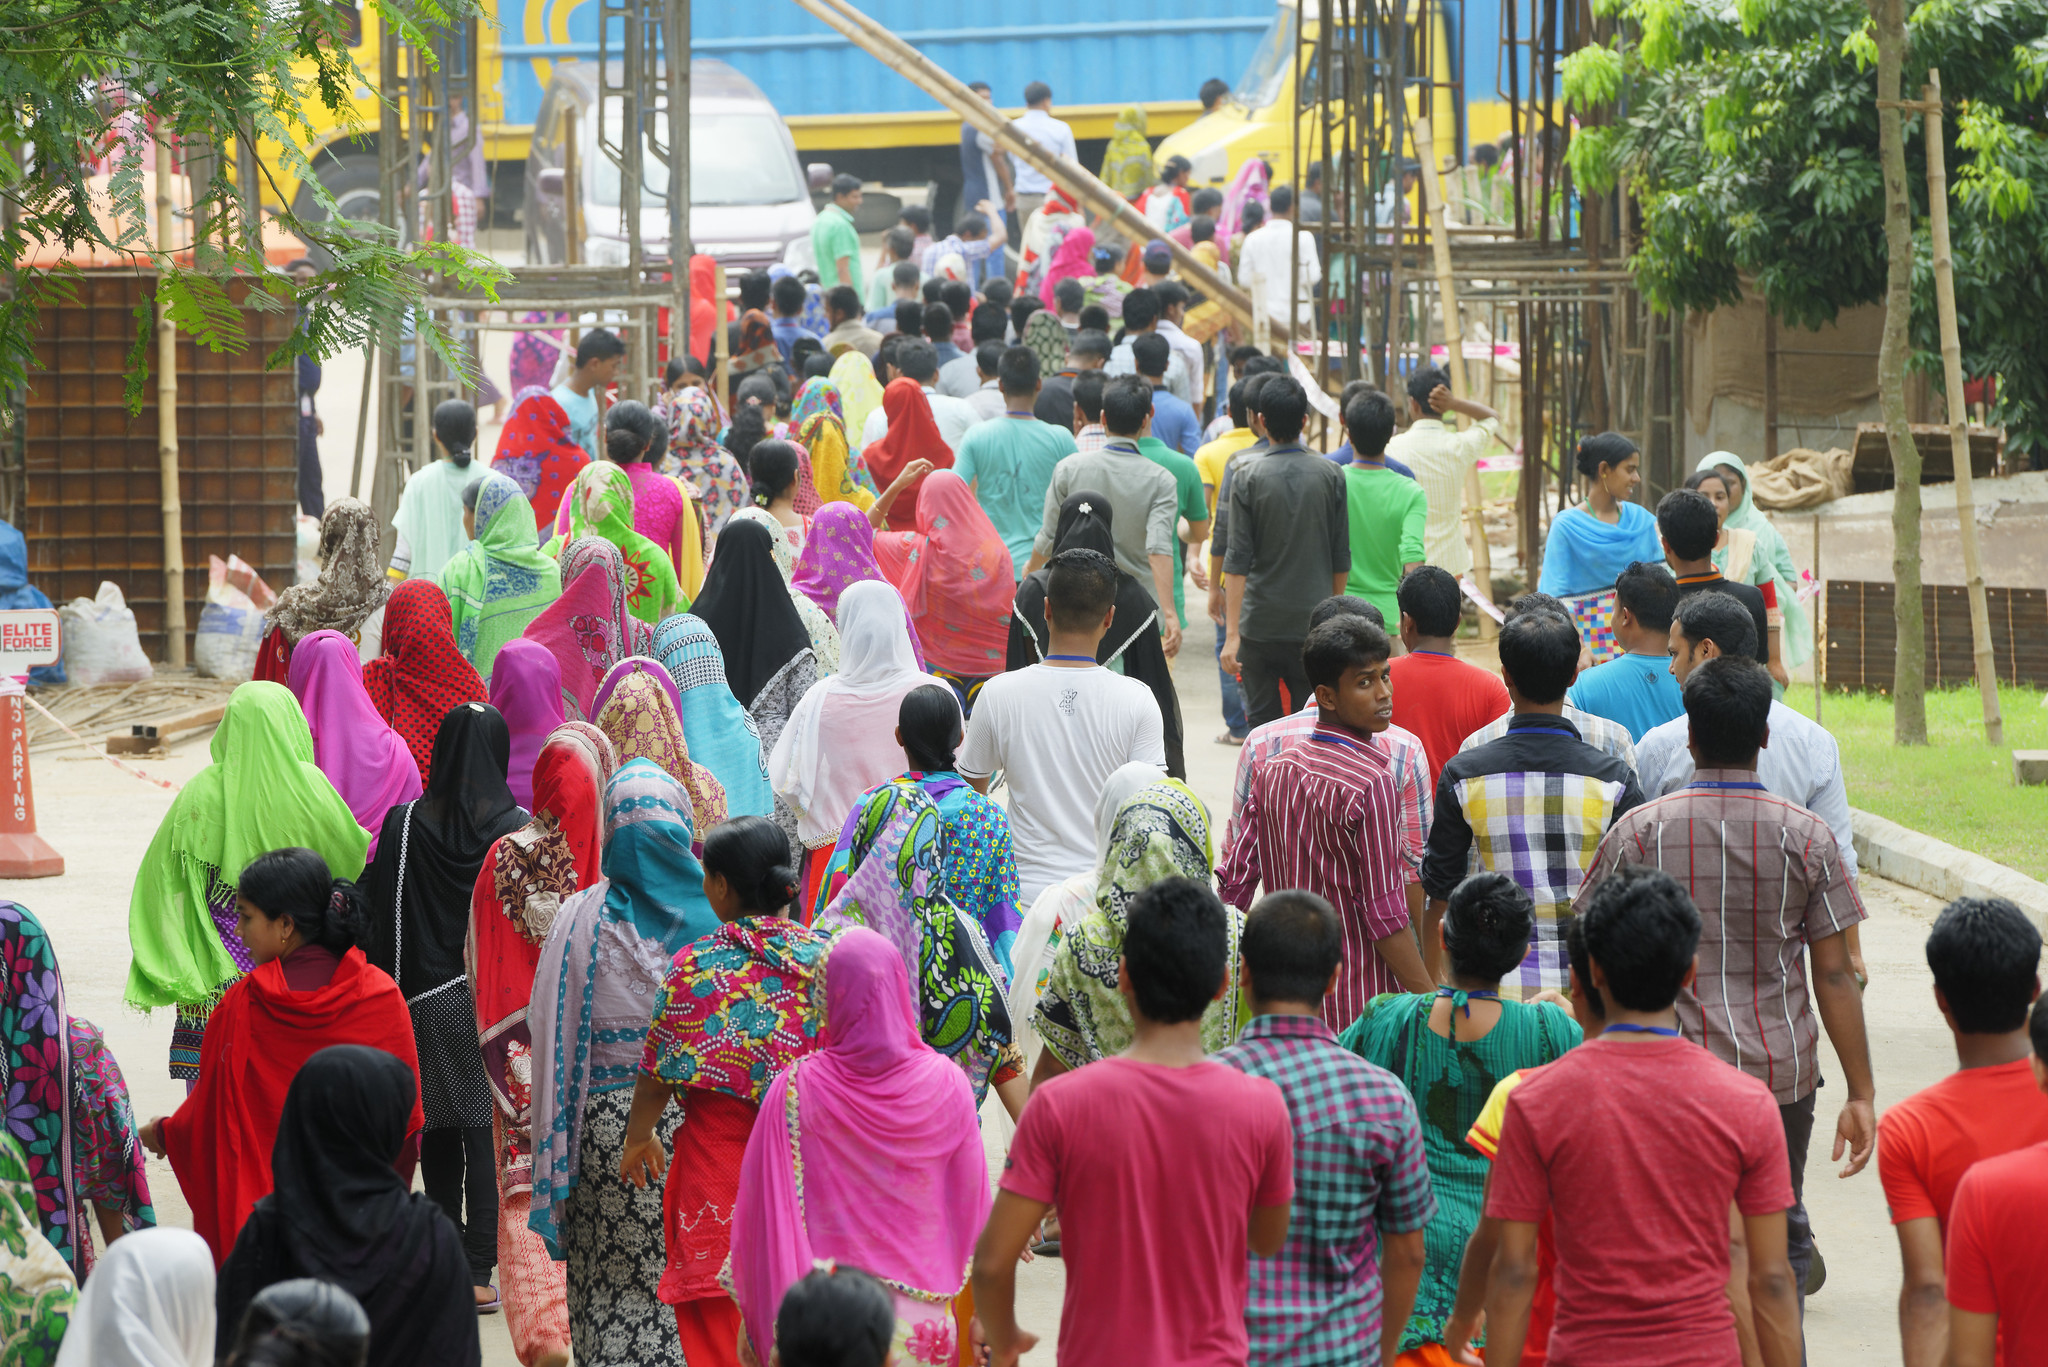 Bangladeshi garment employees are seen leaving a clothing plant at the end of their working day.